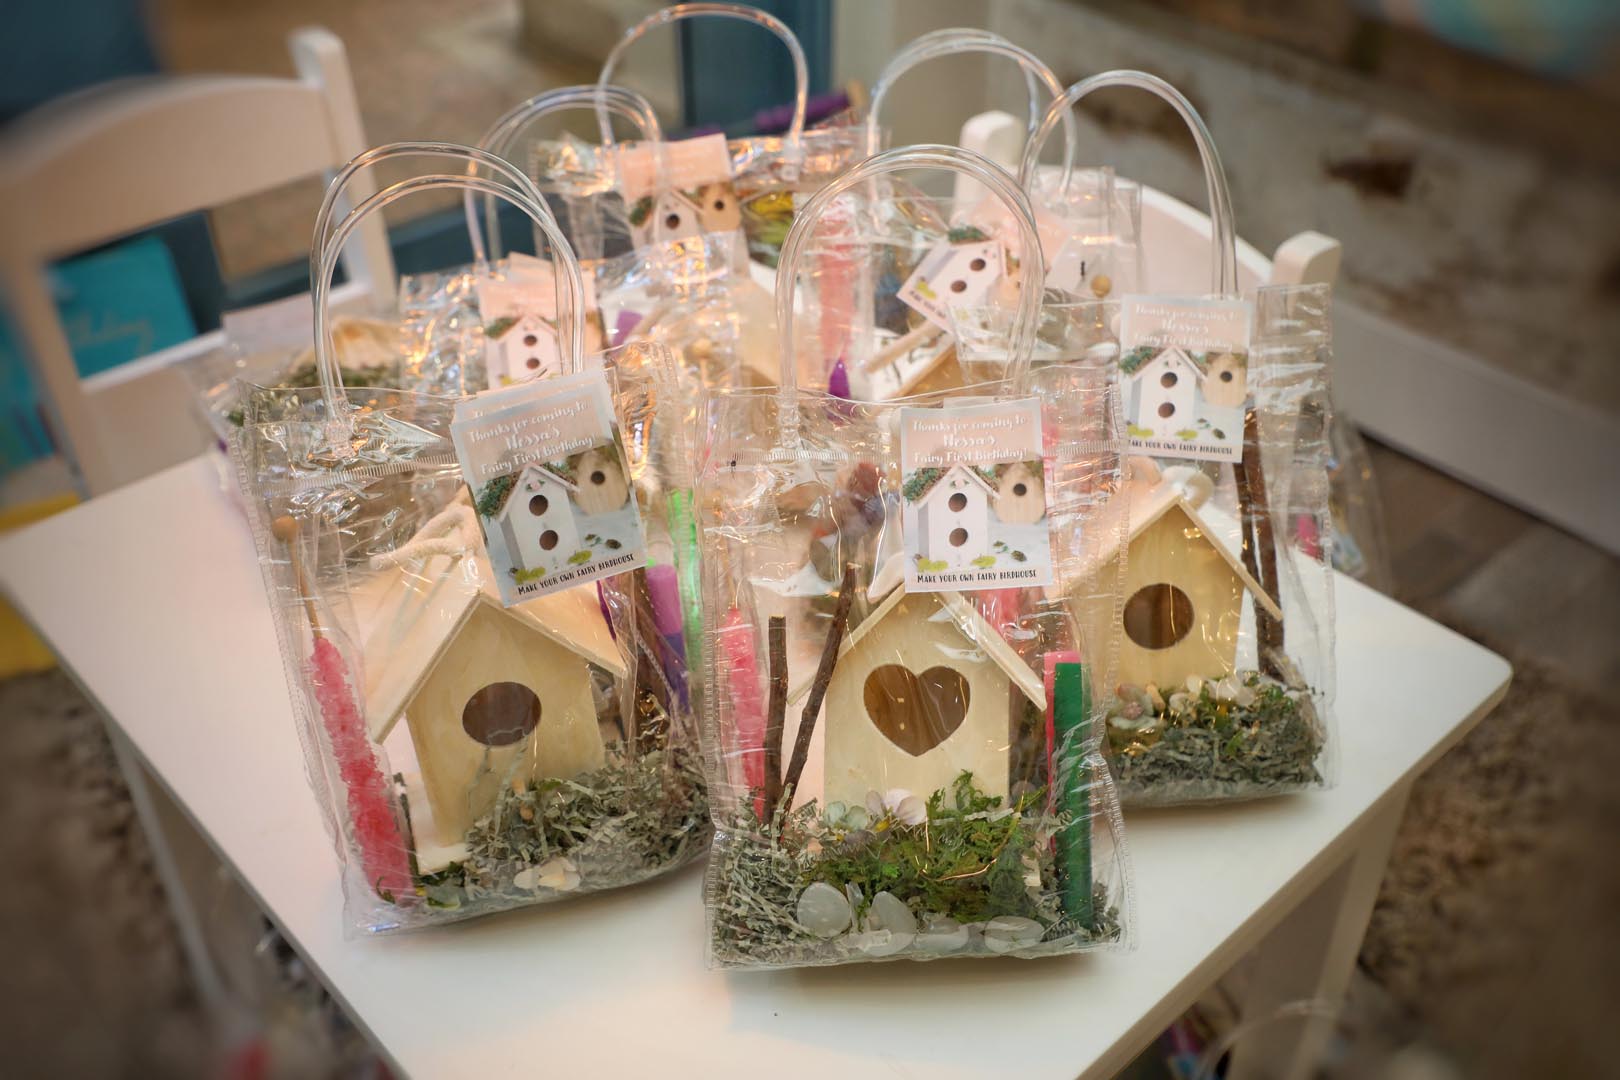 Decorative birthday party celebration gift bags shaped like bird houses surrounded by grass